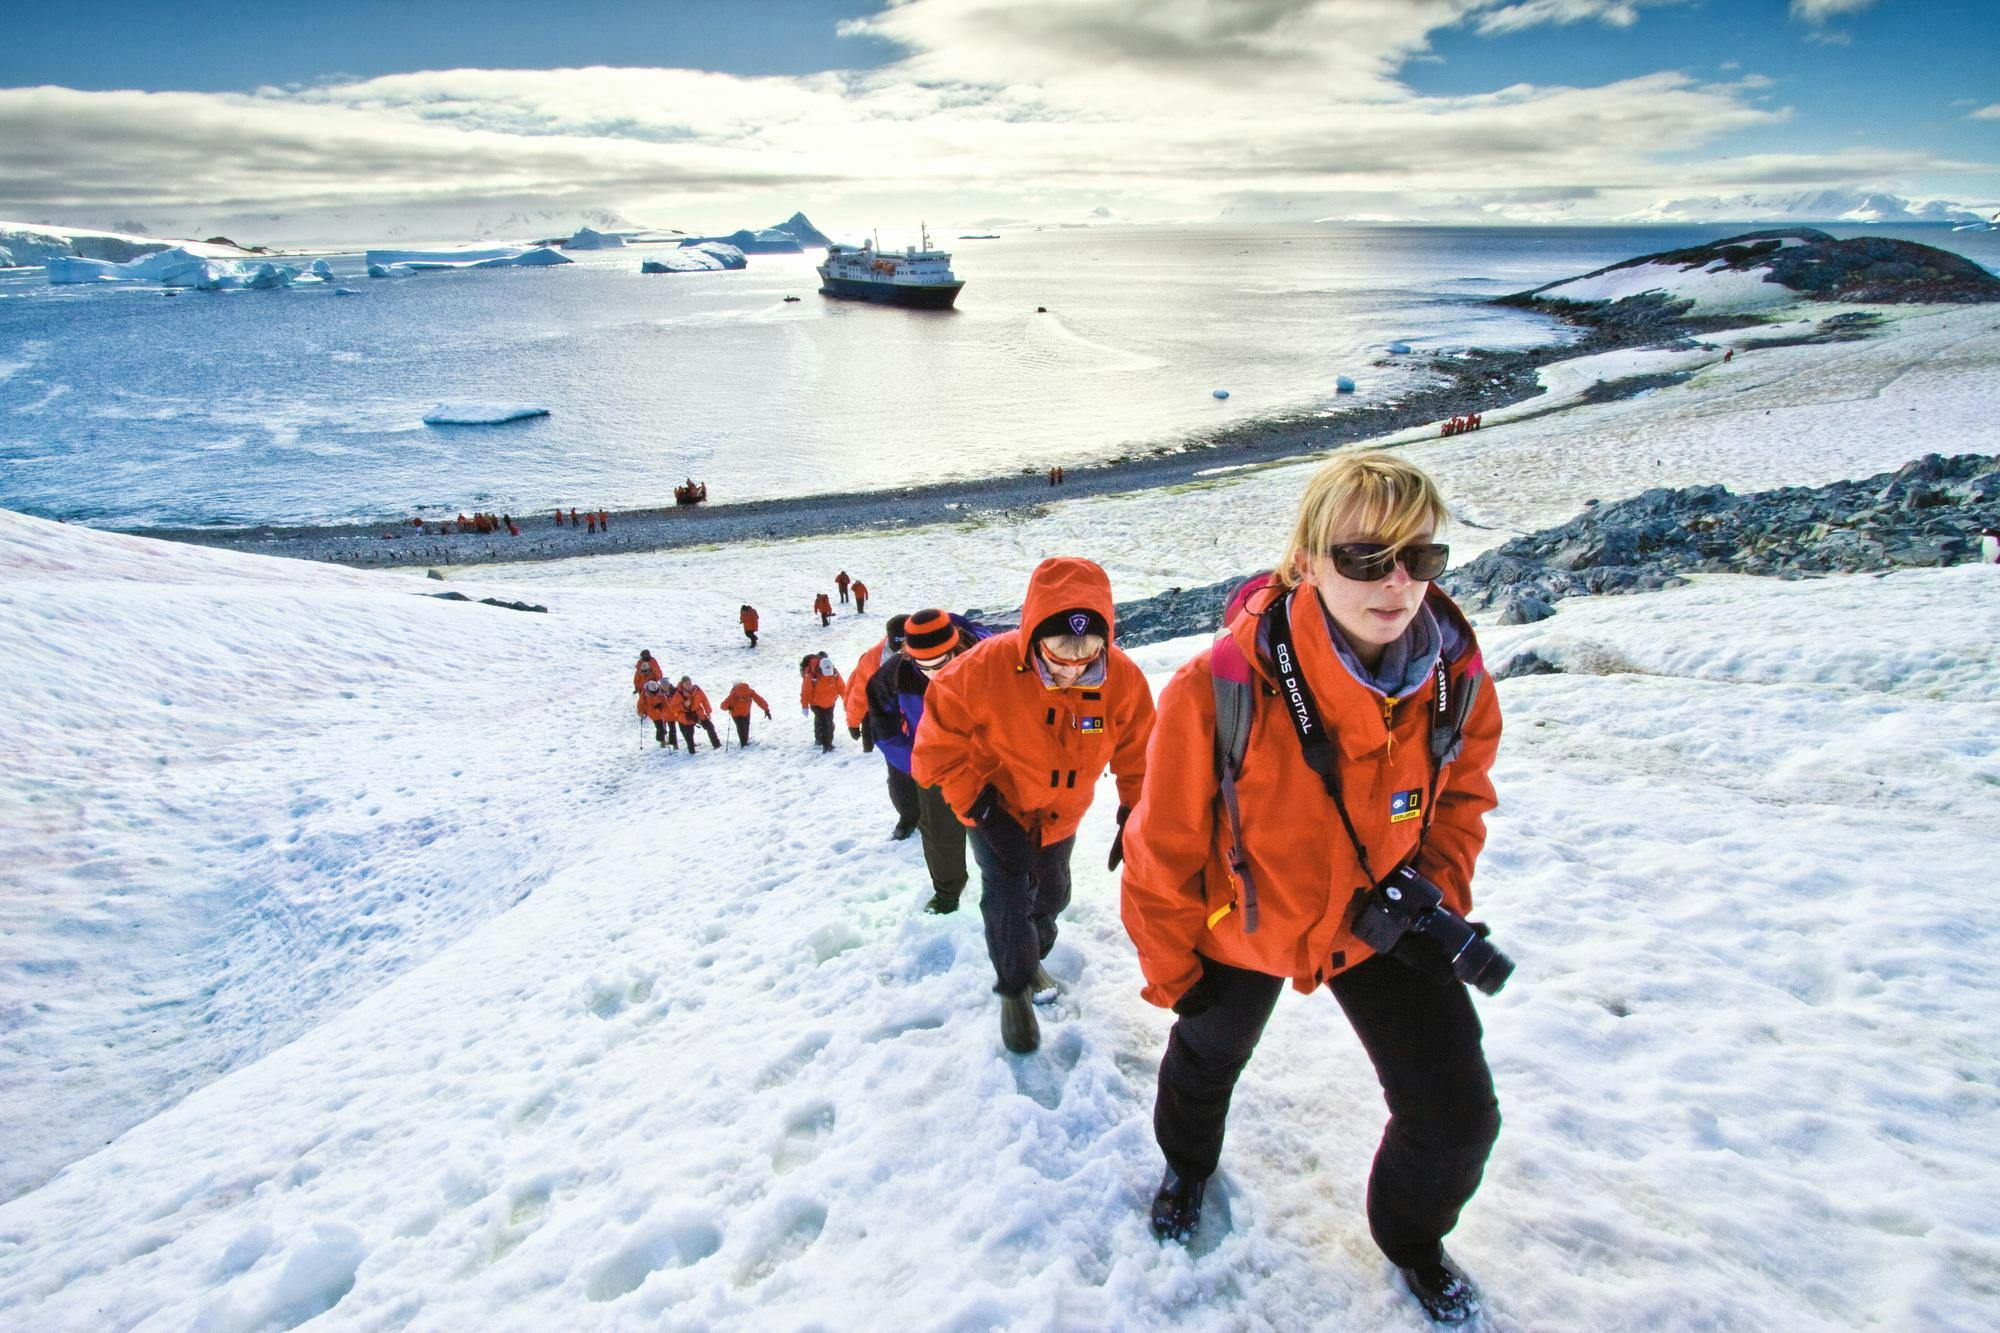 Guests from the ship National Geographic Explorer enjoy Cuverville Island, Antarctica.